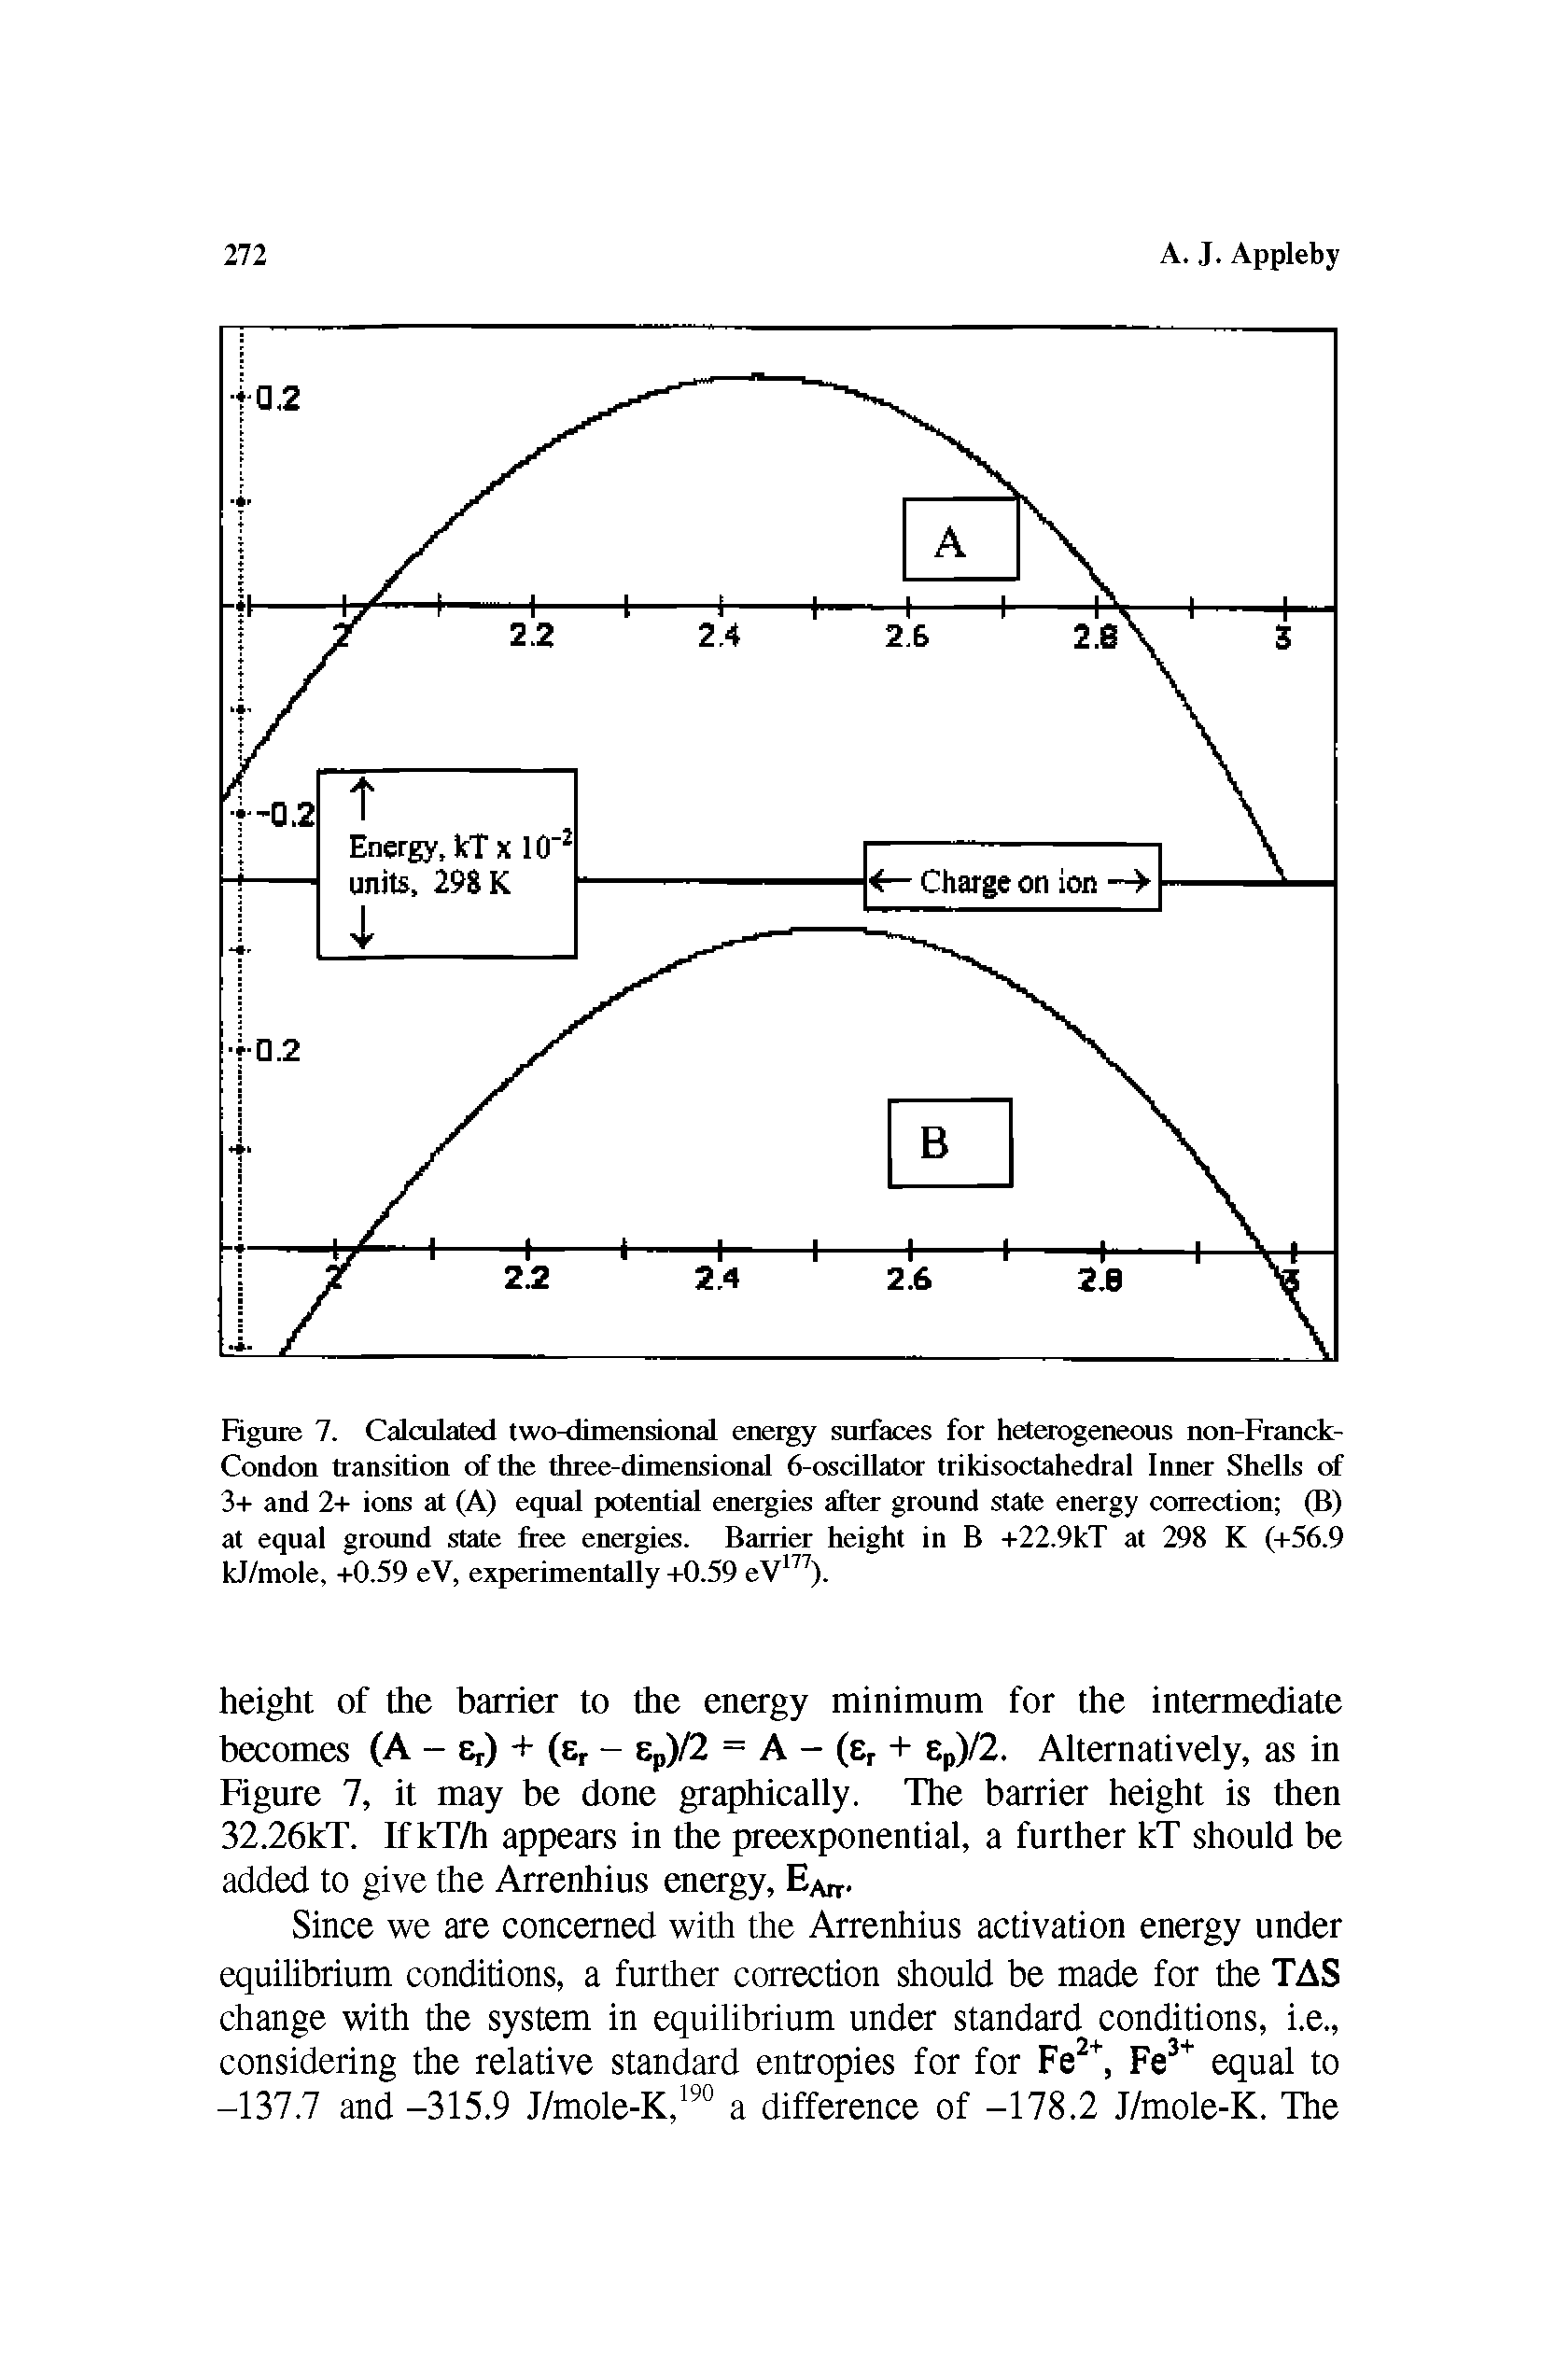 Figure 7. Calculated two-dimensional energy surfaces for heterogeneous non-Franck-Condon transition of the three-dimensional 6-oscillator trikisoctahedral Inner Shells of 3+ and 2+ ions at (A) equal potential energies after ground state energy correction (B) at equal ground state free energies. Barrier height in B +22.9kT at 298 K (+56.9 kJ/mole, +0.59 eV, experimentally +0.59 eV177).